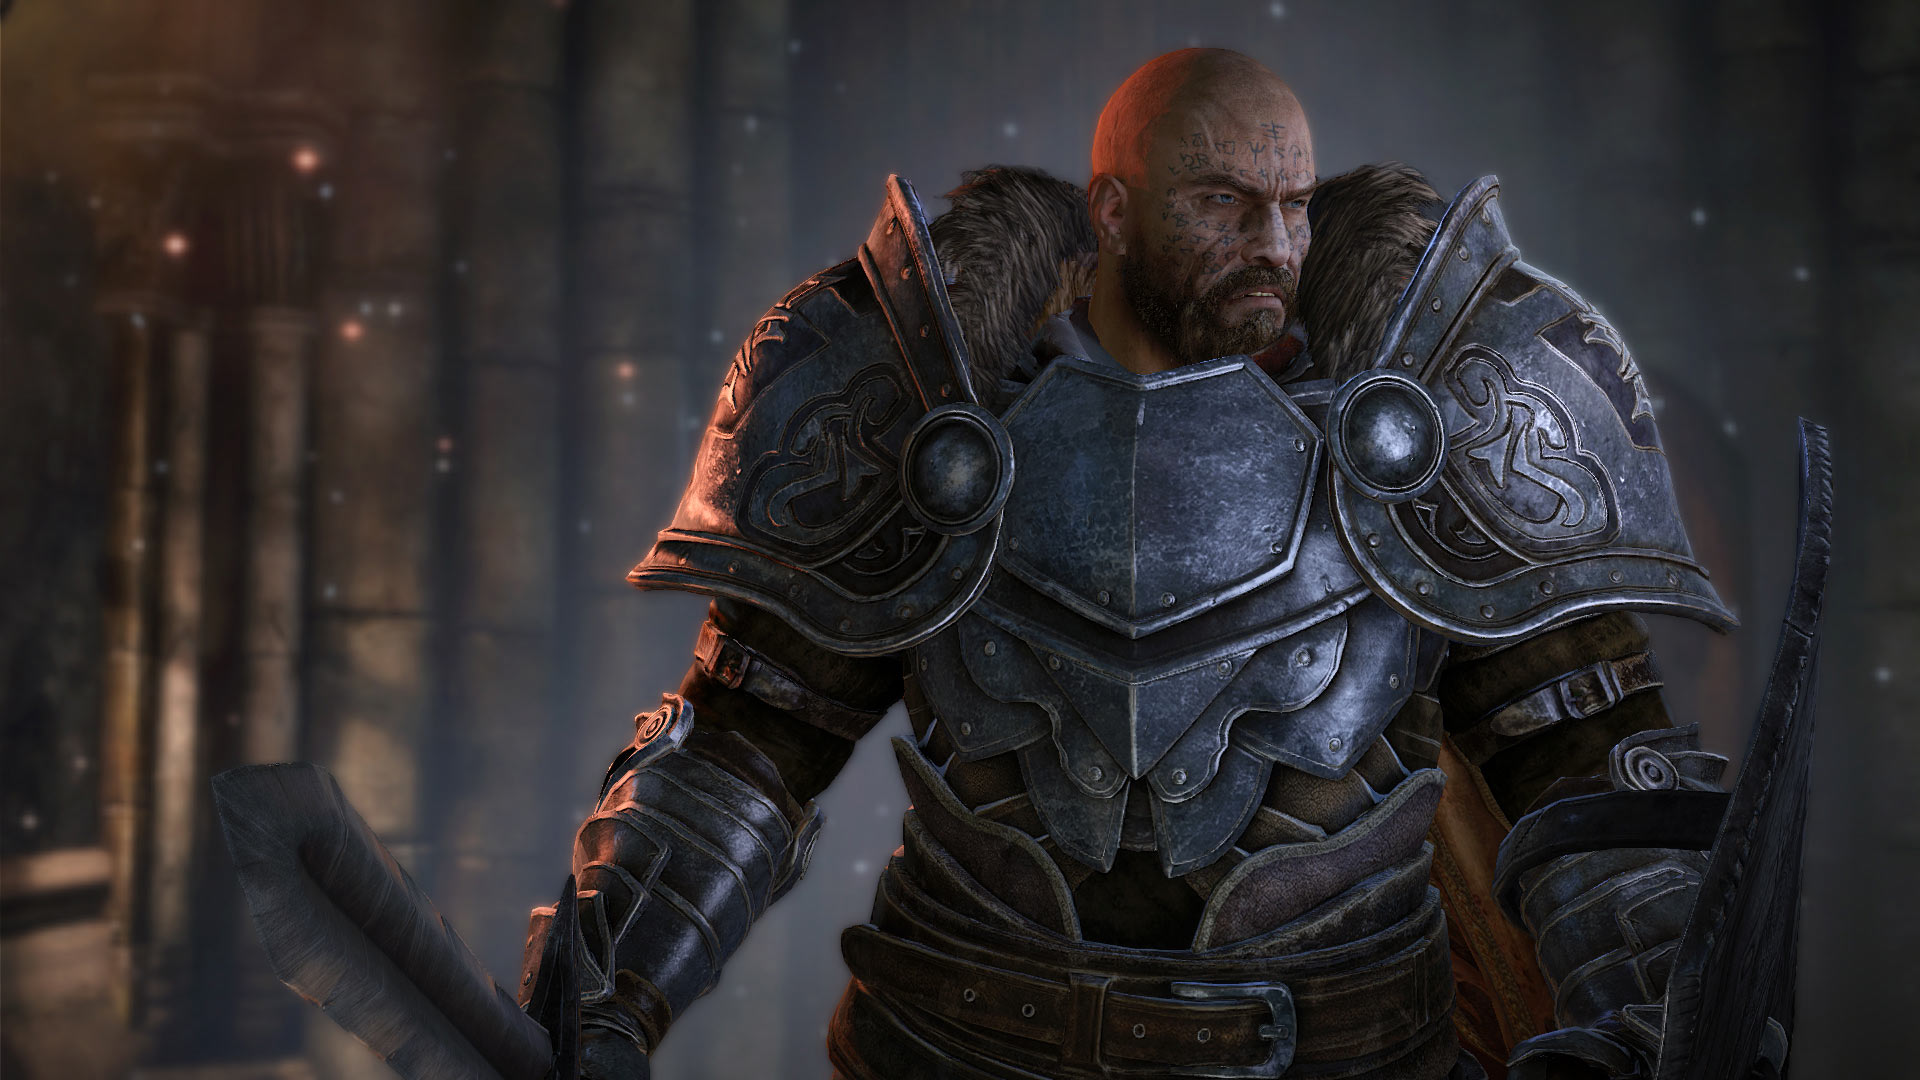 The Lords of the Fallen dev wants their game to be Dark Souls 4.5